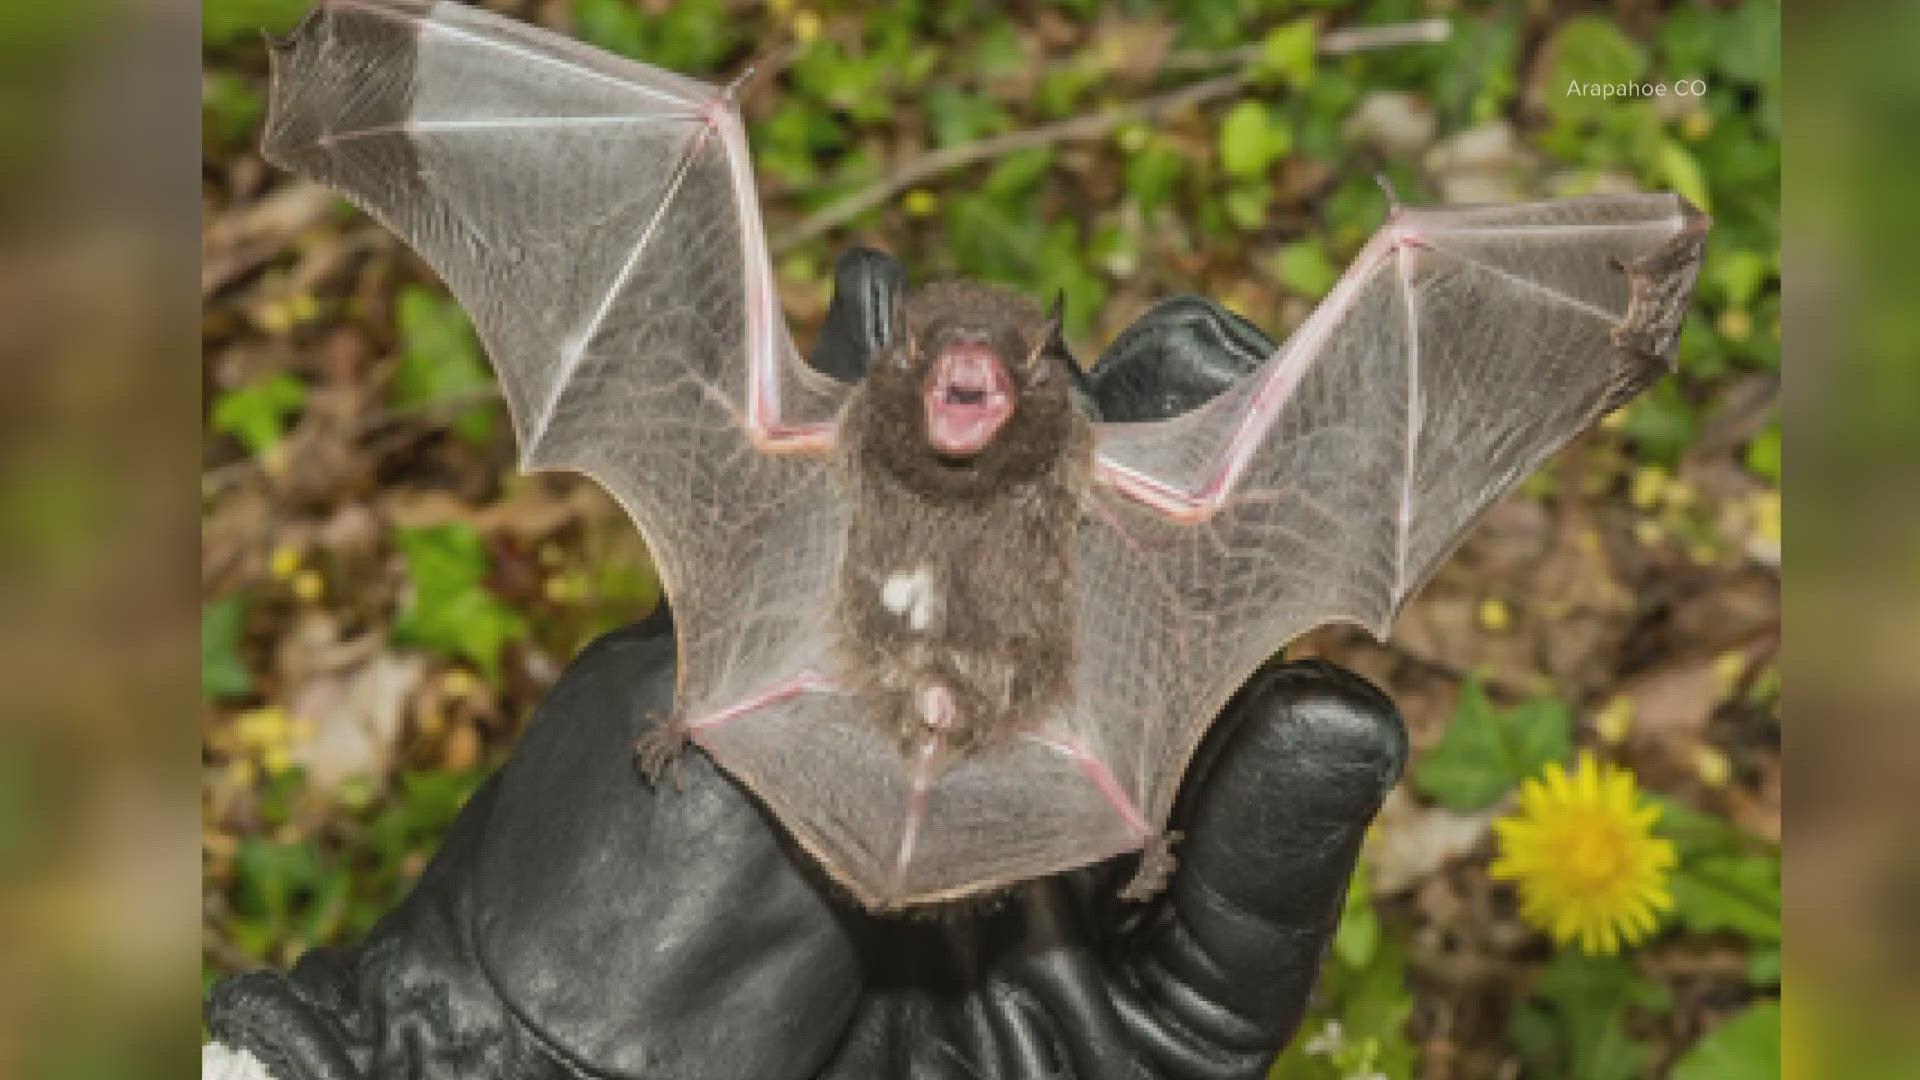 A person came into contact with the bat and has started rabies treatment to prevent infection and illness, Arapahoe County Public Health said.